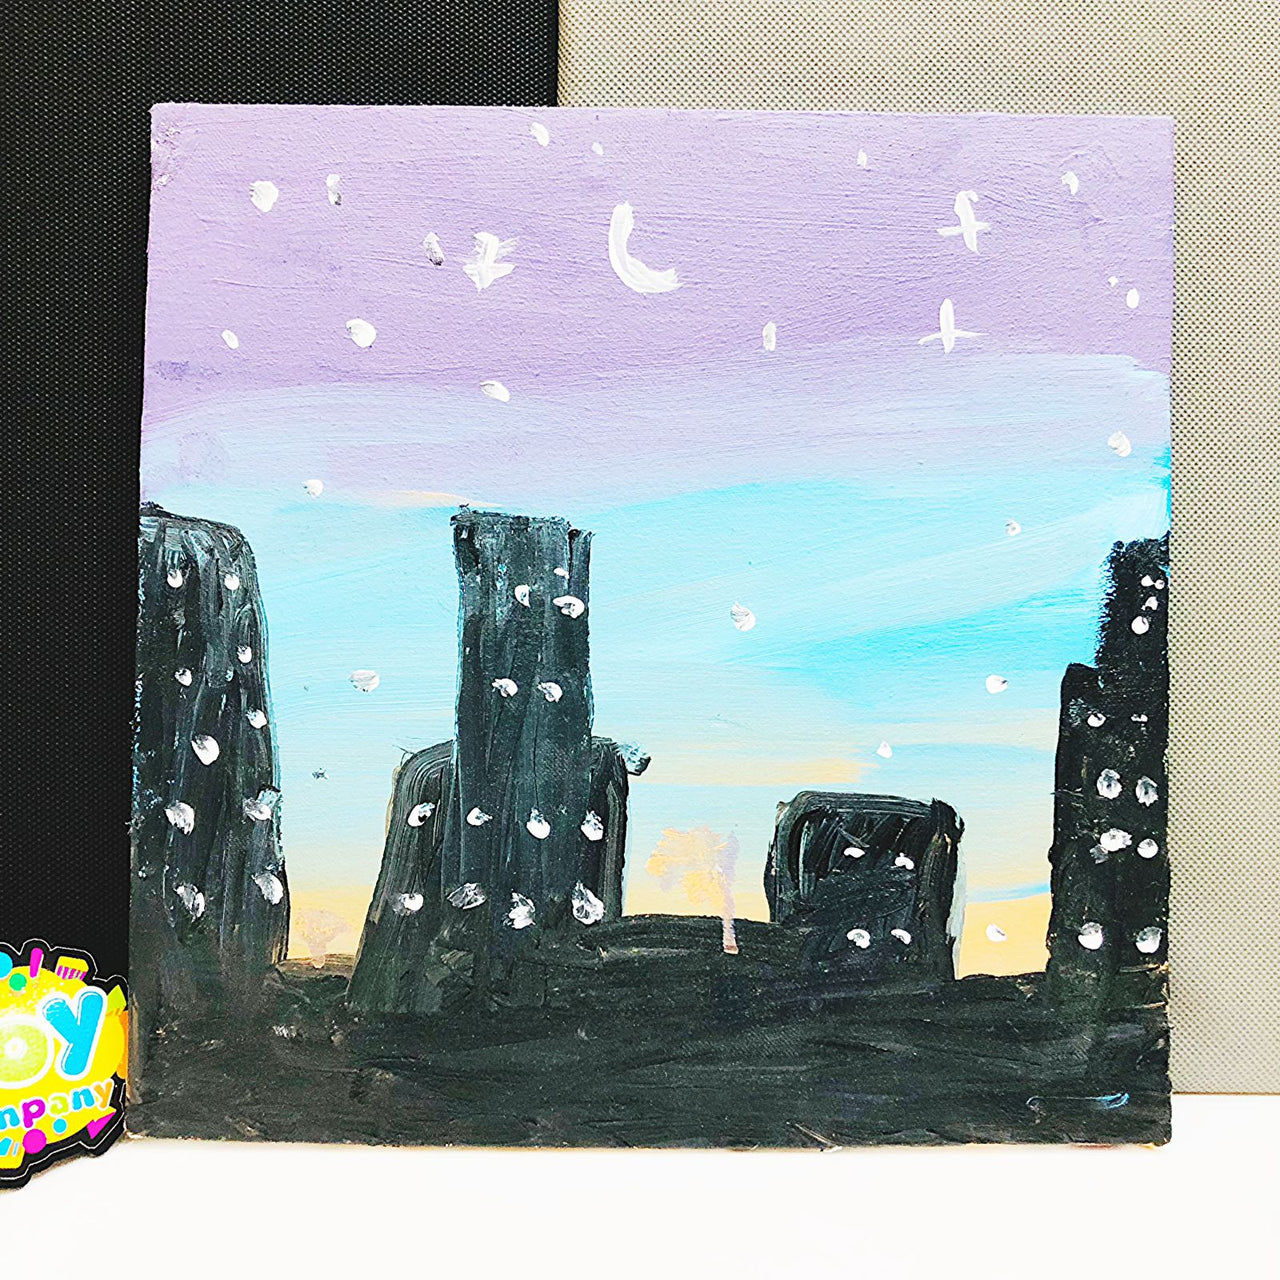 12x12* Inches Evening Scenery Canvas Painting